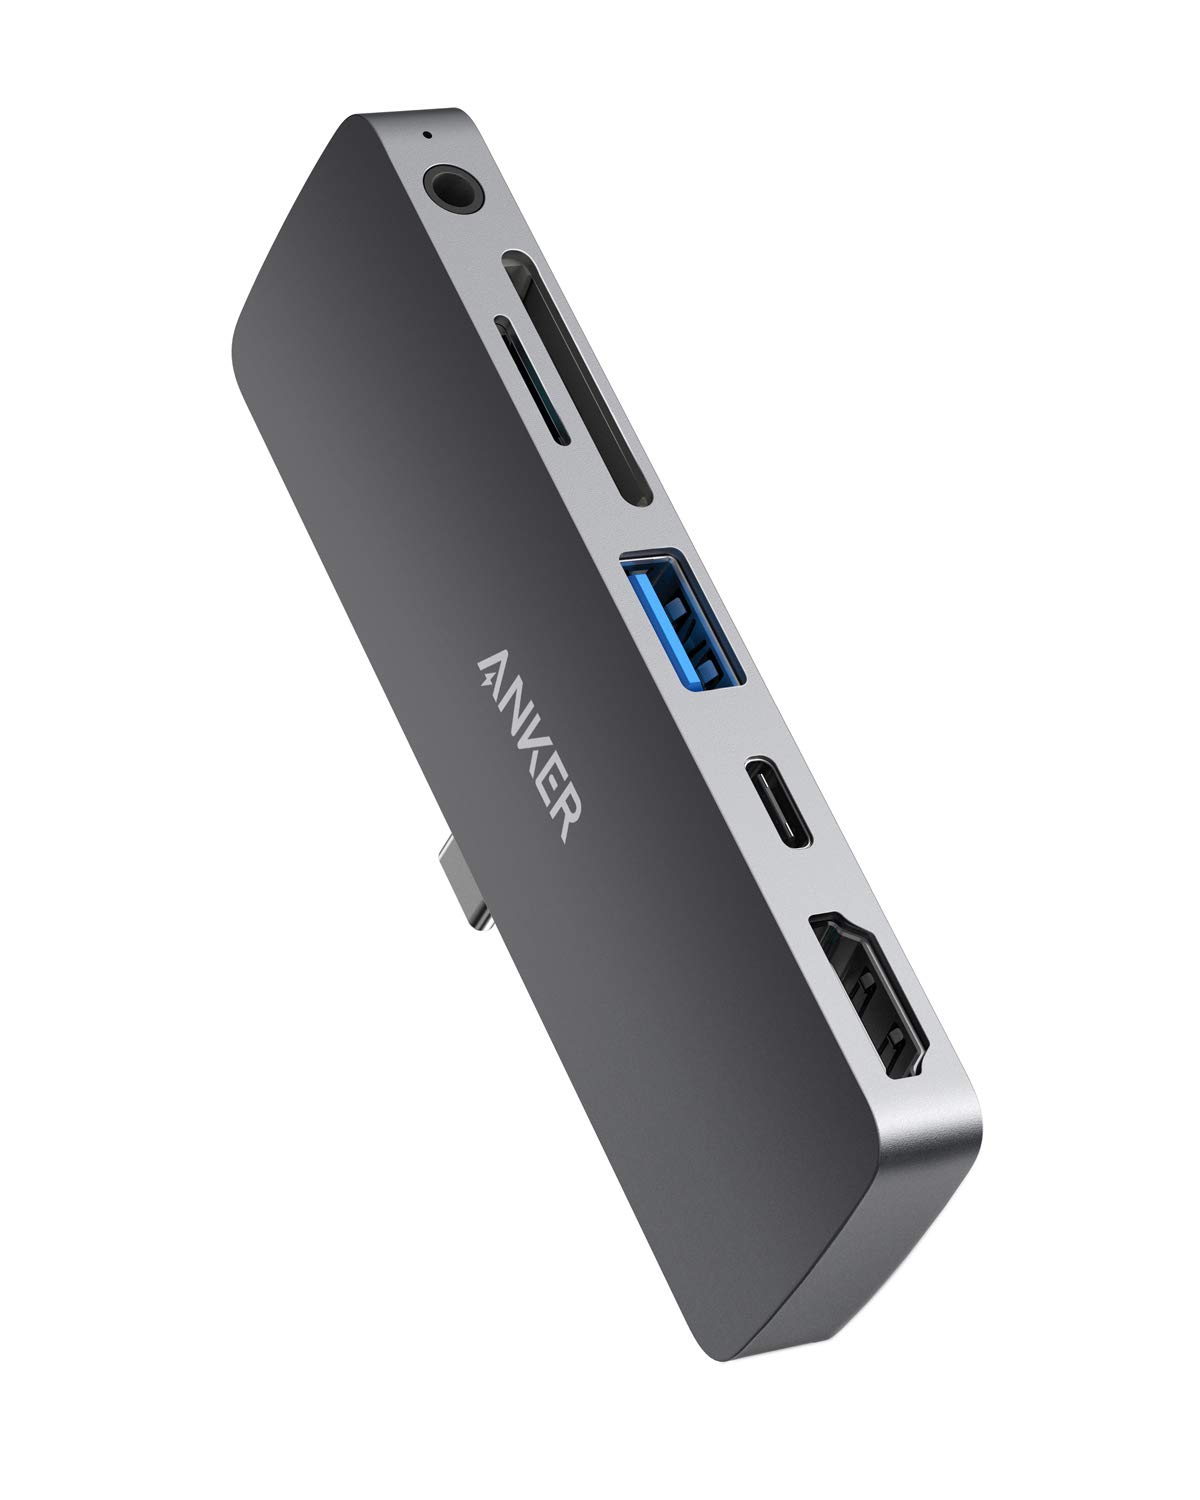 Anker USB C Hub for iPad Pro, PowerExpand Direct 6-in-1 USB C Adapter, with 60W Power Delivery, 4K HDMI, Audio, USB 3.0, SD and microSD Card Reader $39.99